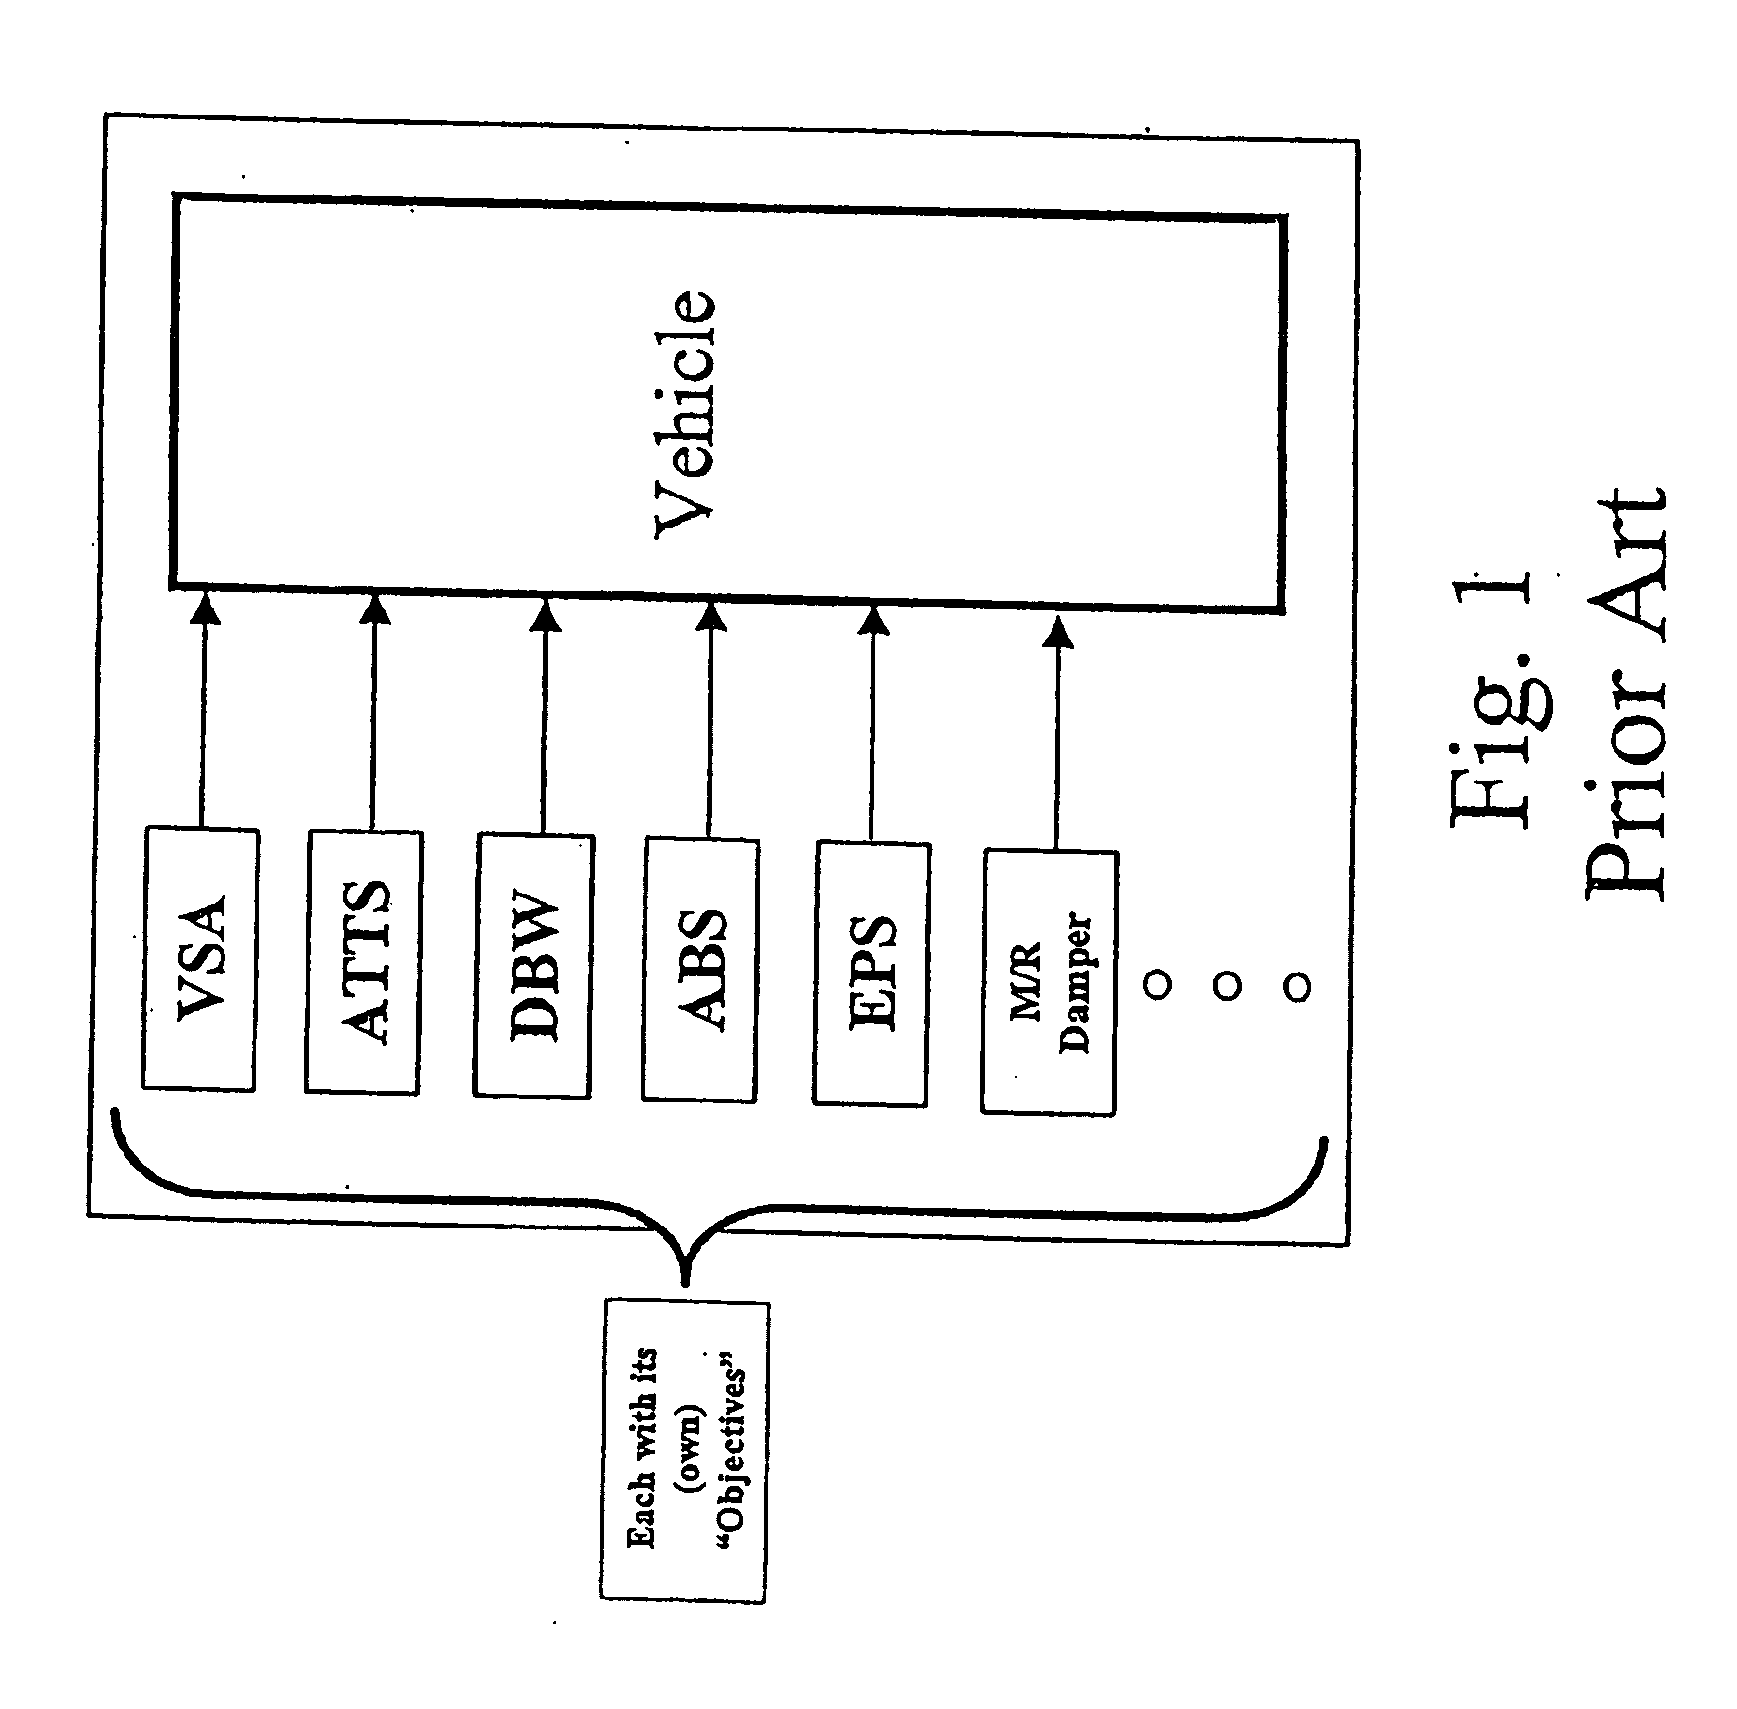 Cooperative vehicle control system